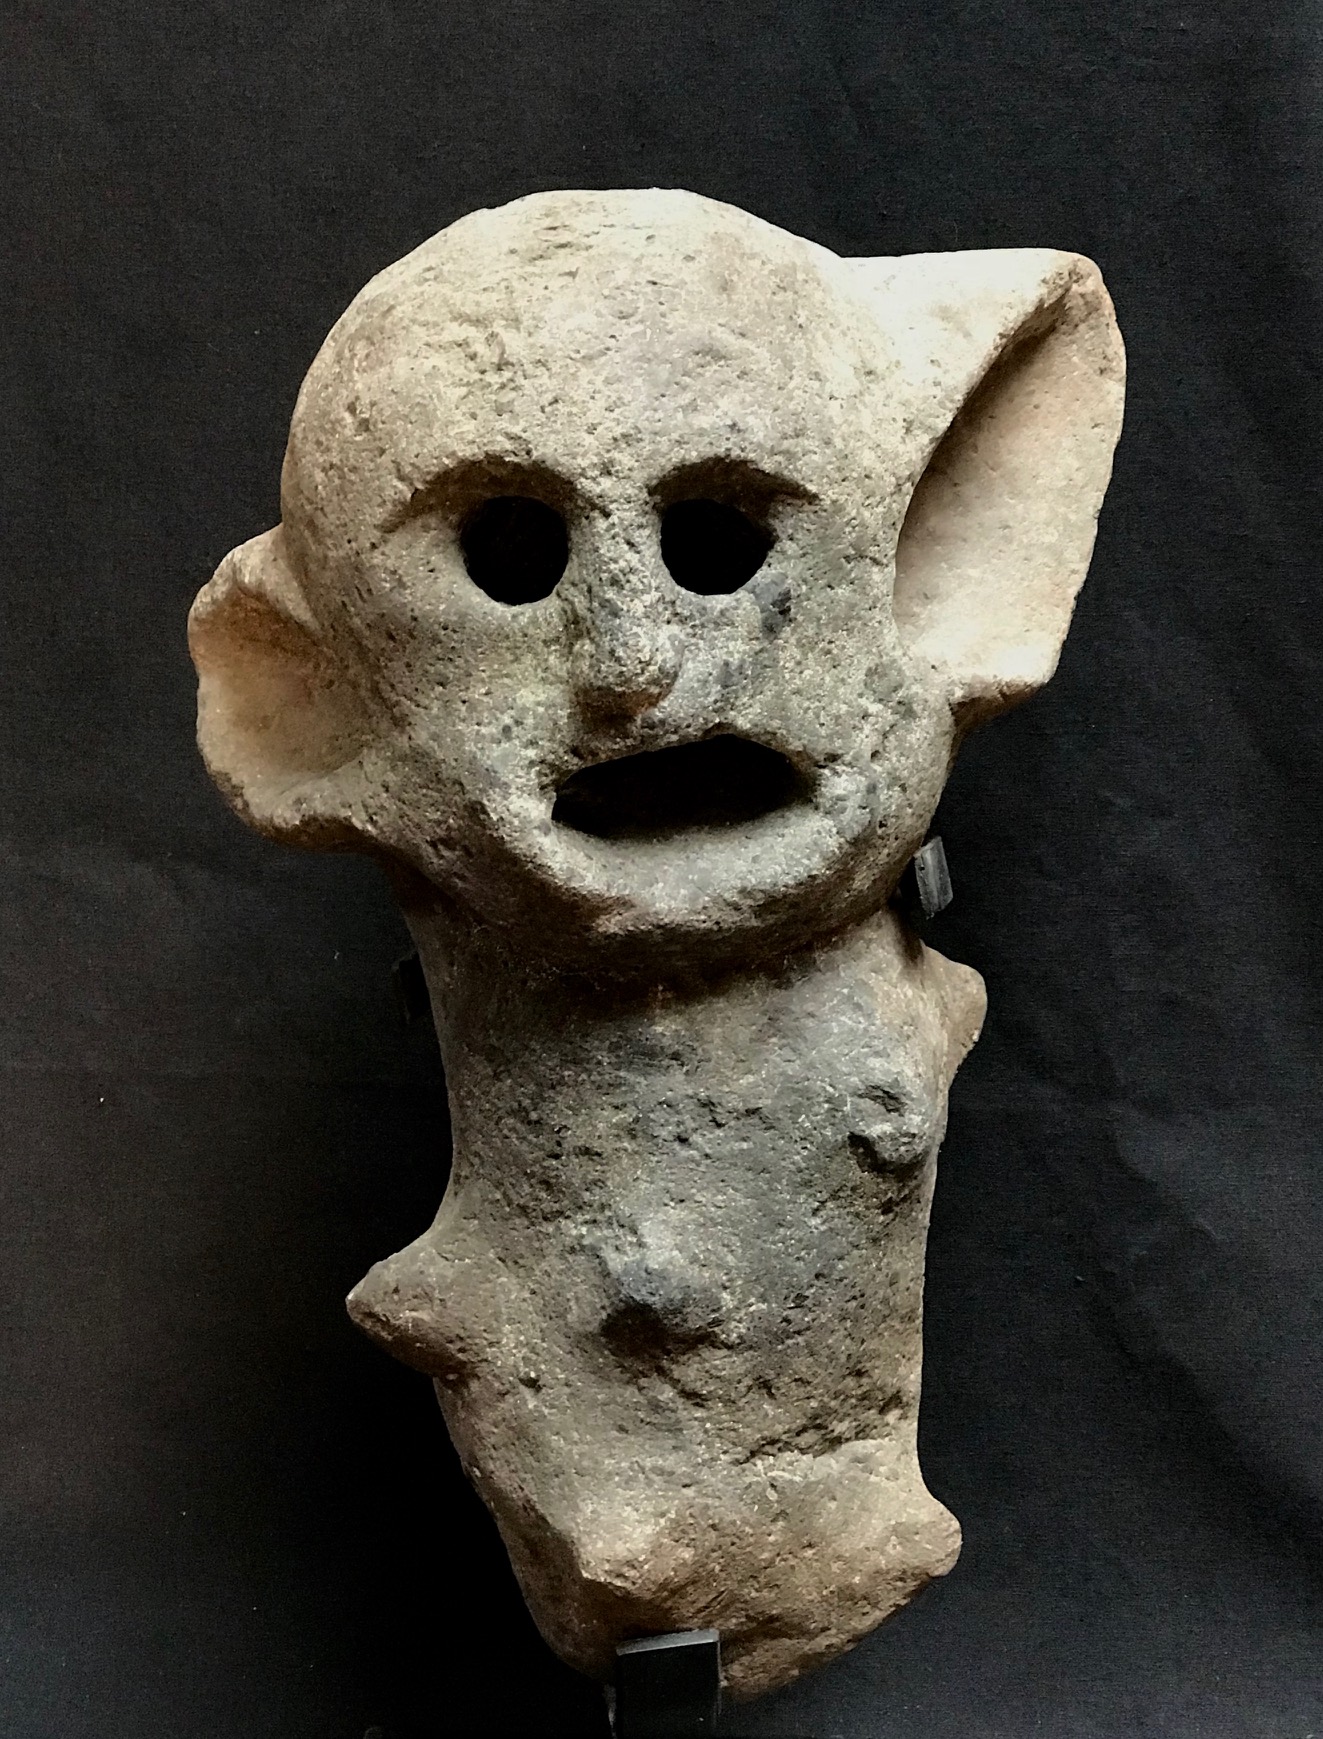 Shaman figure - Rare, for healing and divination rituals. Dhoki village, Flores Island, Indonesia, stone, late 19th to early 20th c., This effigy was passed down from father to son. Once a year, it is fed blood to empower it. 14" x 9 1/2" 6 1/2" w/o base (17" with base),